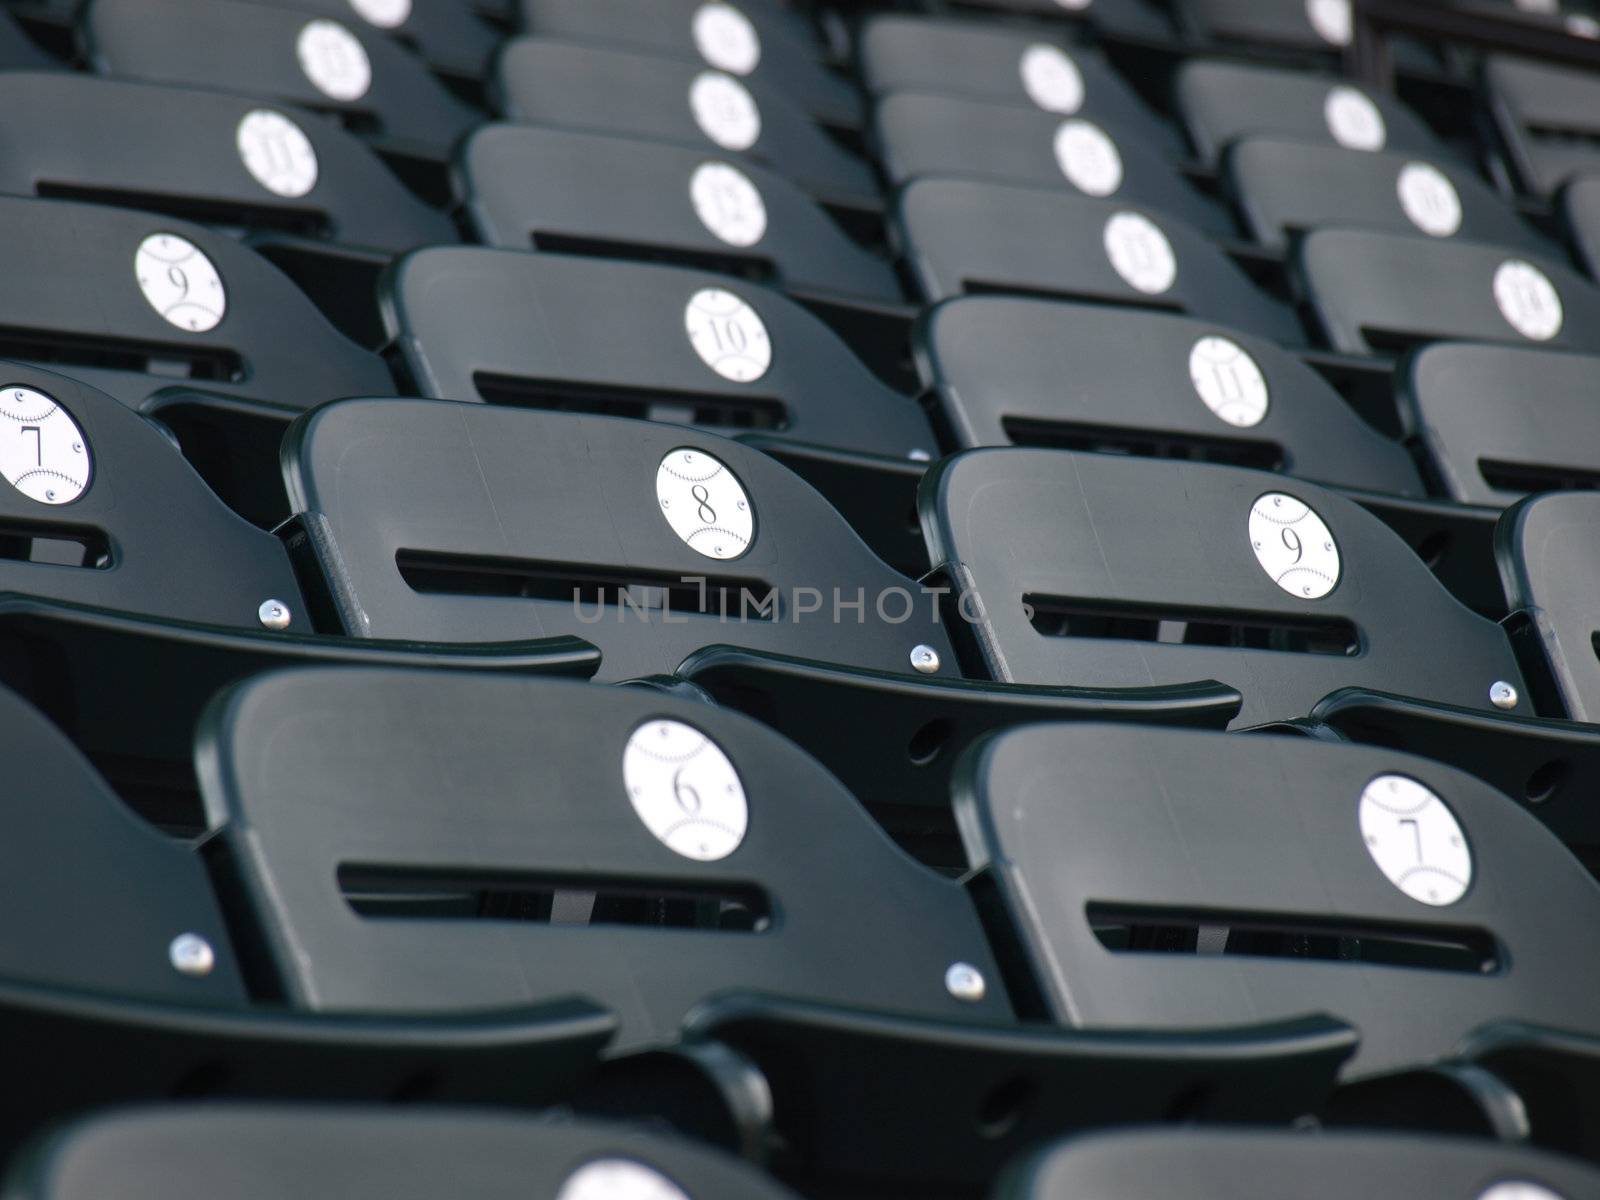 Numbered seats by northwoodsphoto